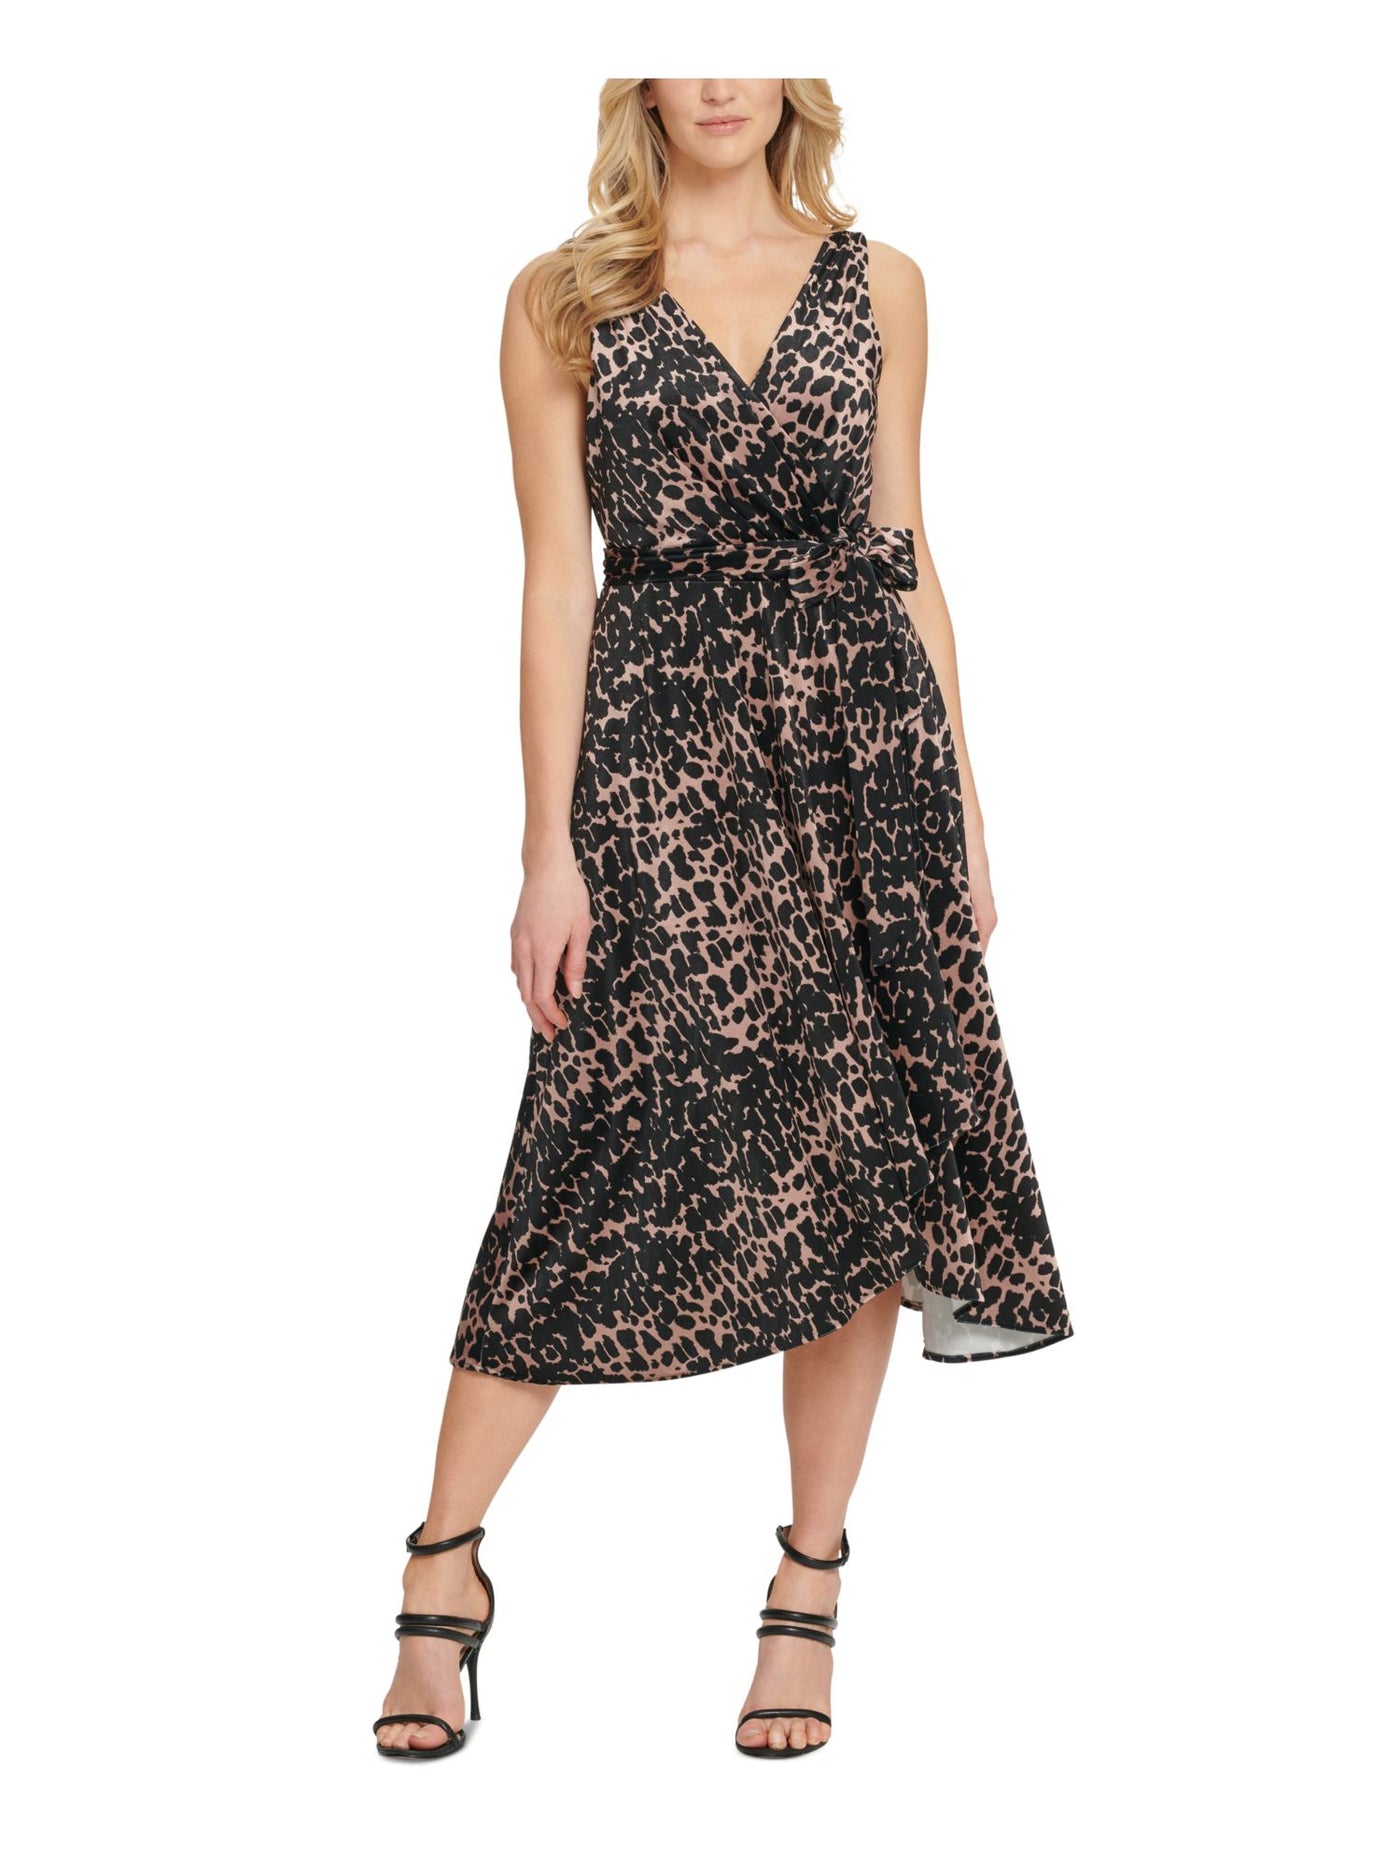 DKNY Womens Belted Evening Faux Wrap Dress